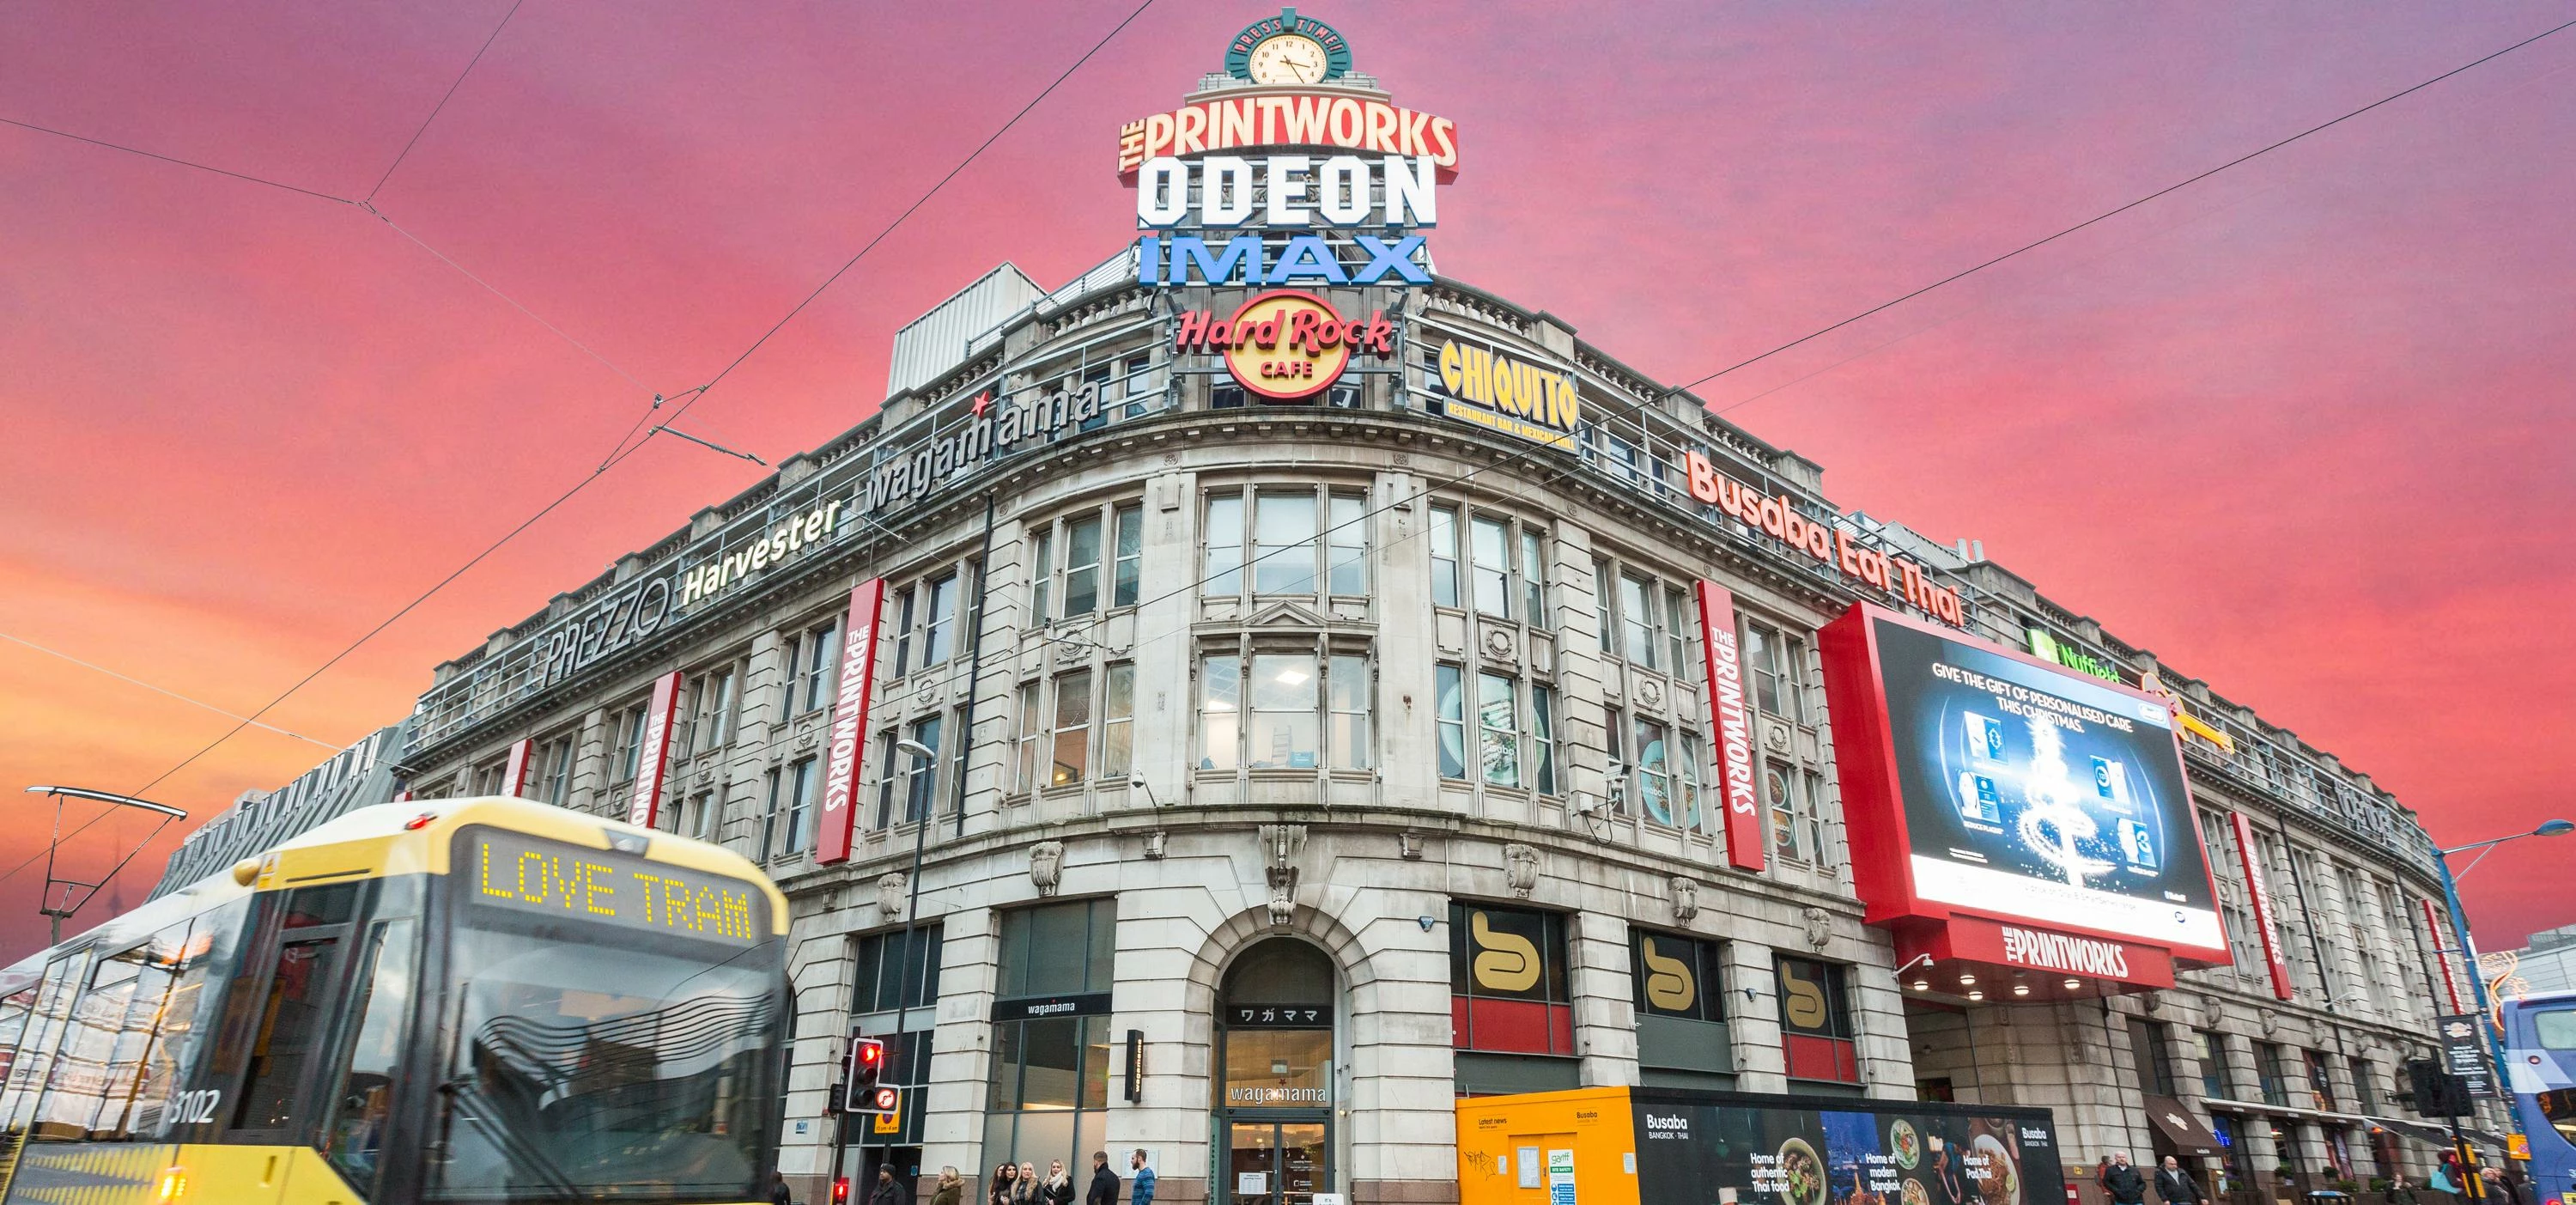 The Printworks is also transporting guests to the venue via Love Tram